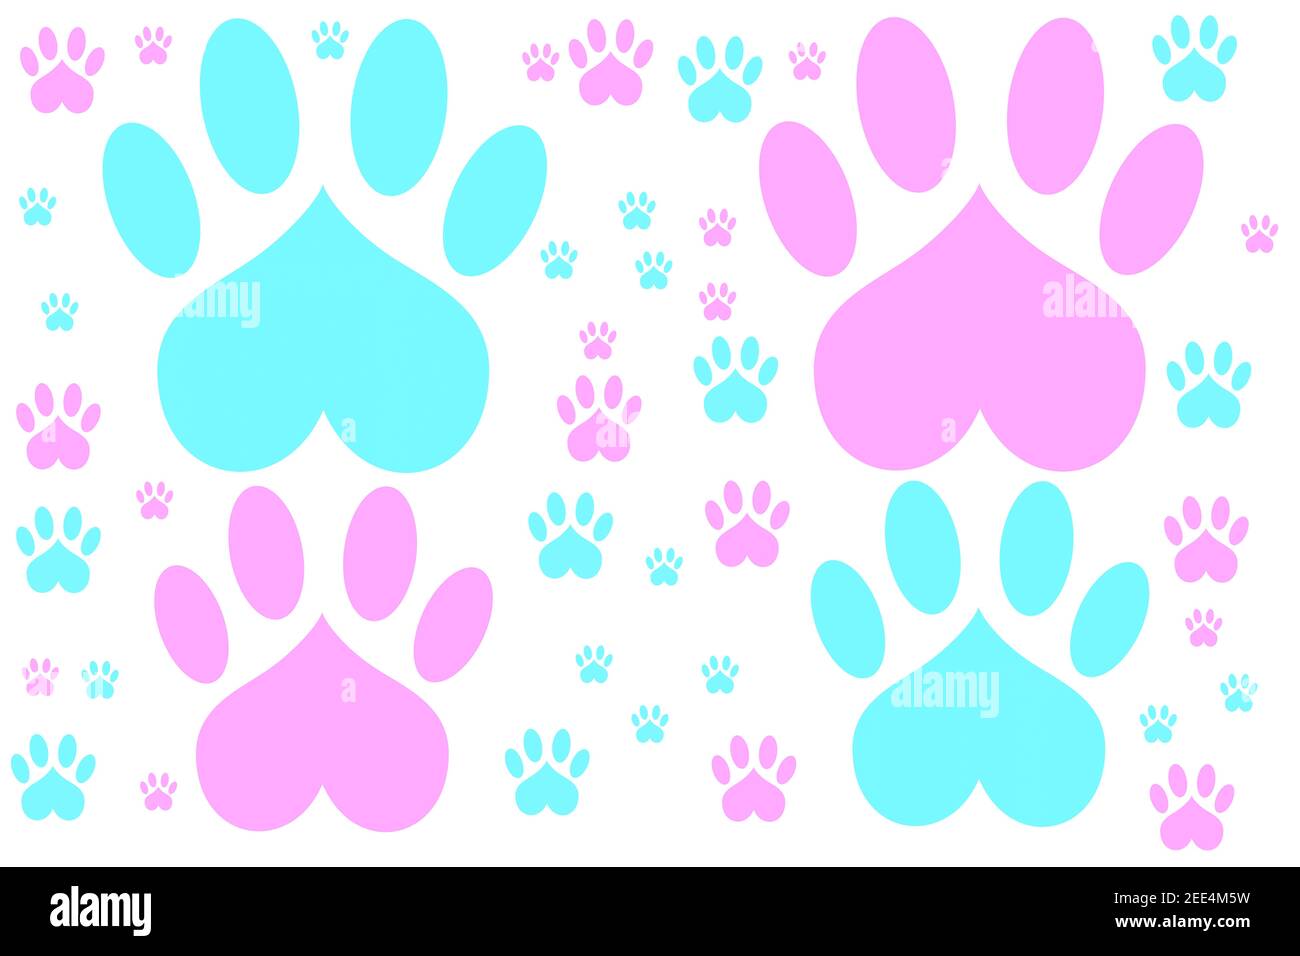 Pink and blue paws on a white background Stock Photo